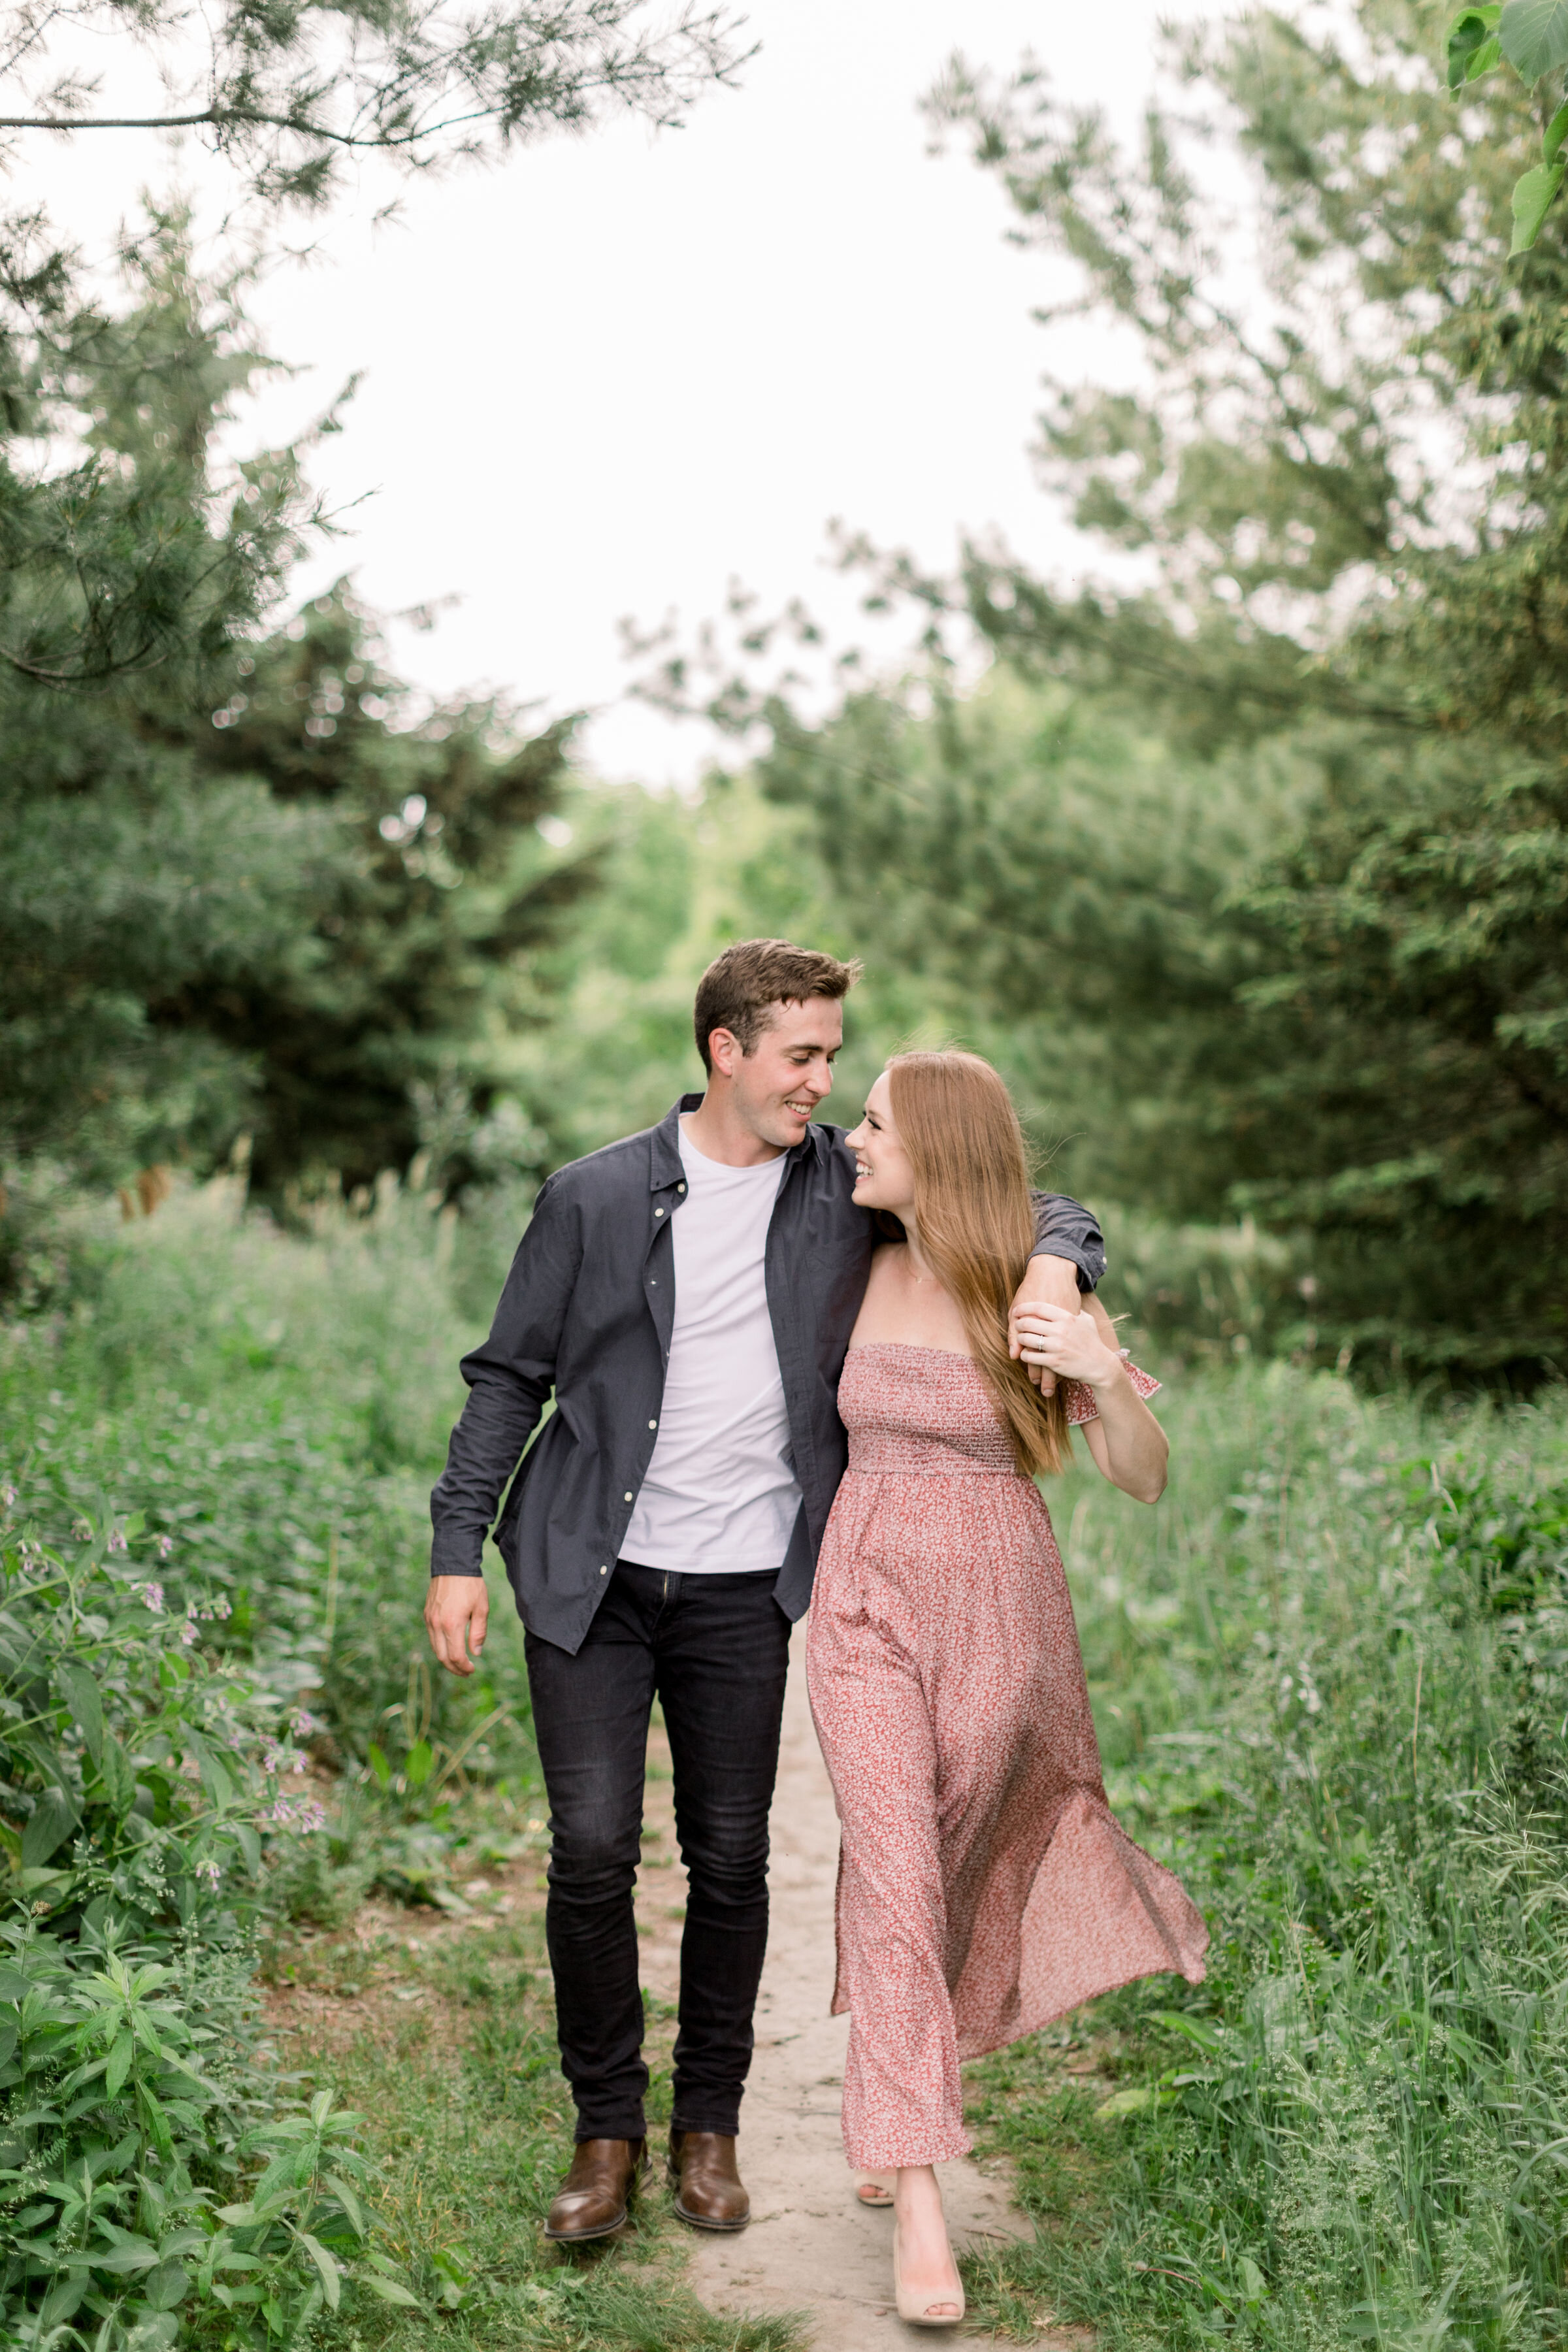  Arboretum, Ottawa's Chelsea Mason Photography captures this soon-to-be groom wrap his arms around his fiancé while they walk through an unpaved pathway during their engagement session. engaged couple poses authentic couple poses playful engagements 